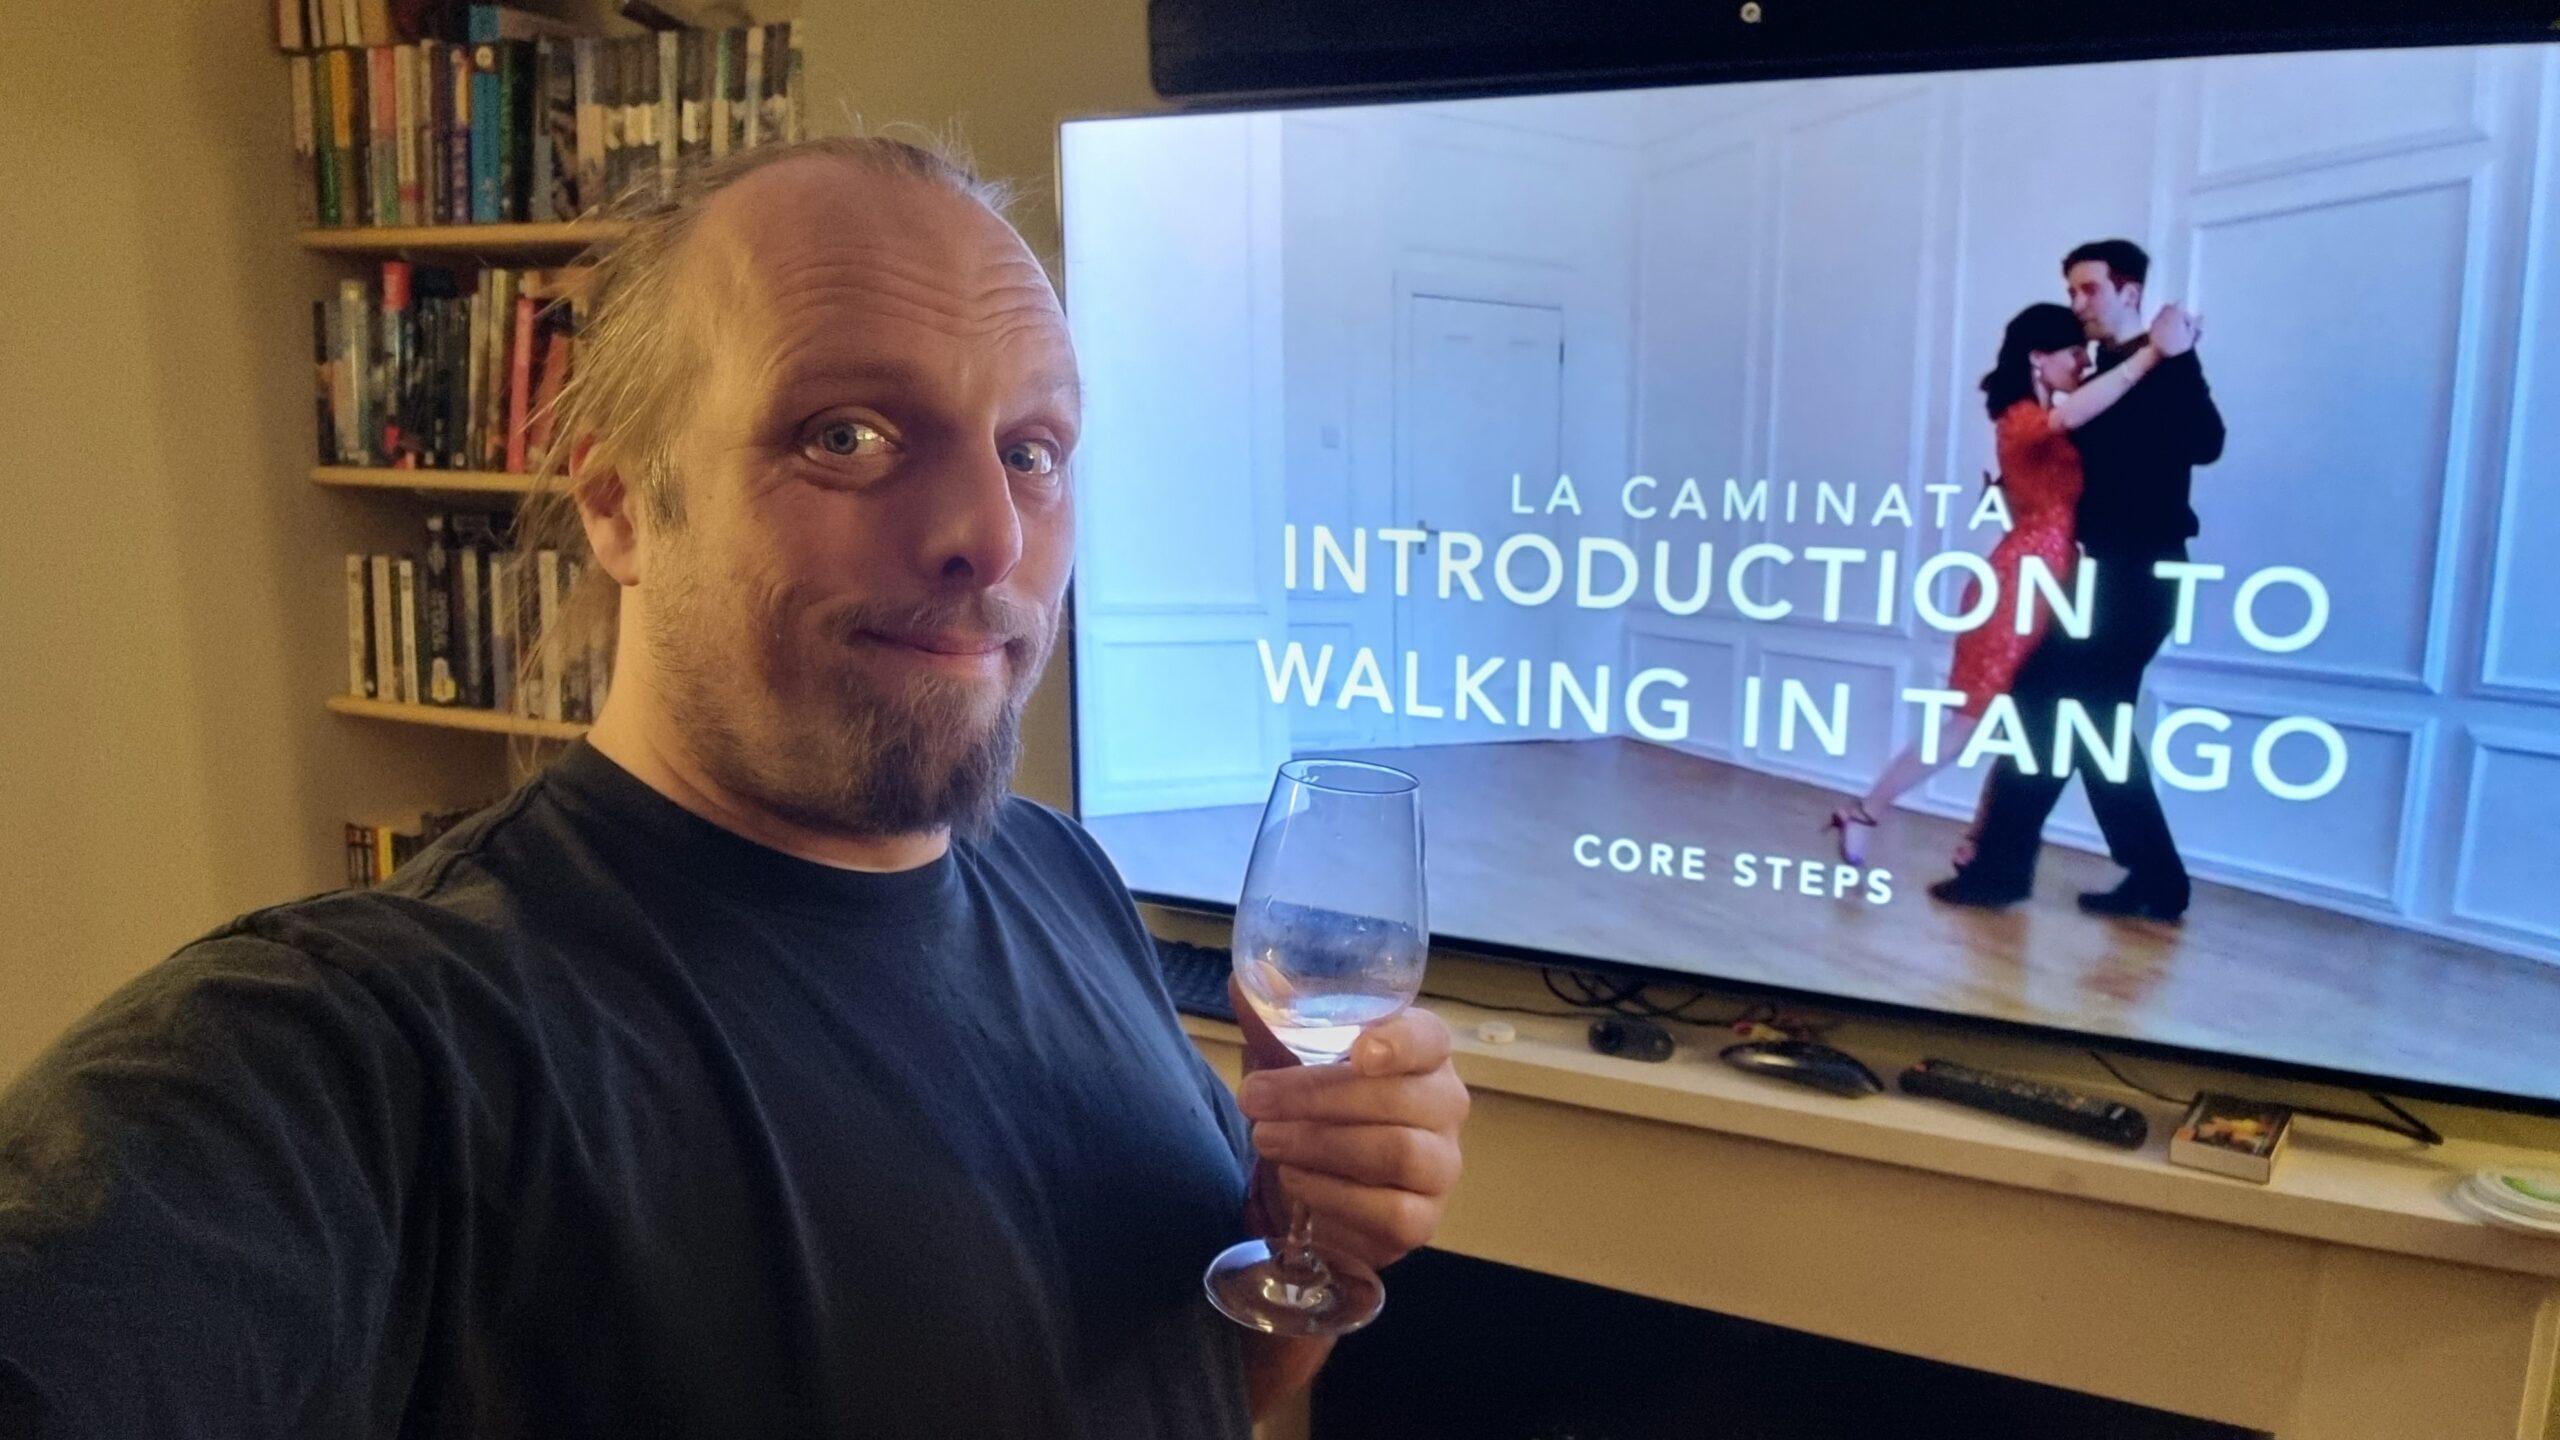 Dan, wearing a black t-shirt and holding a glass of wine, looks sceptically at the camera as he stands in front of a television screen showing a couple dancing, with the title frame "La Caminata: Introduction to Walking in Tango (Core Steps)".